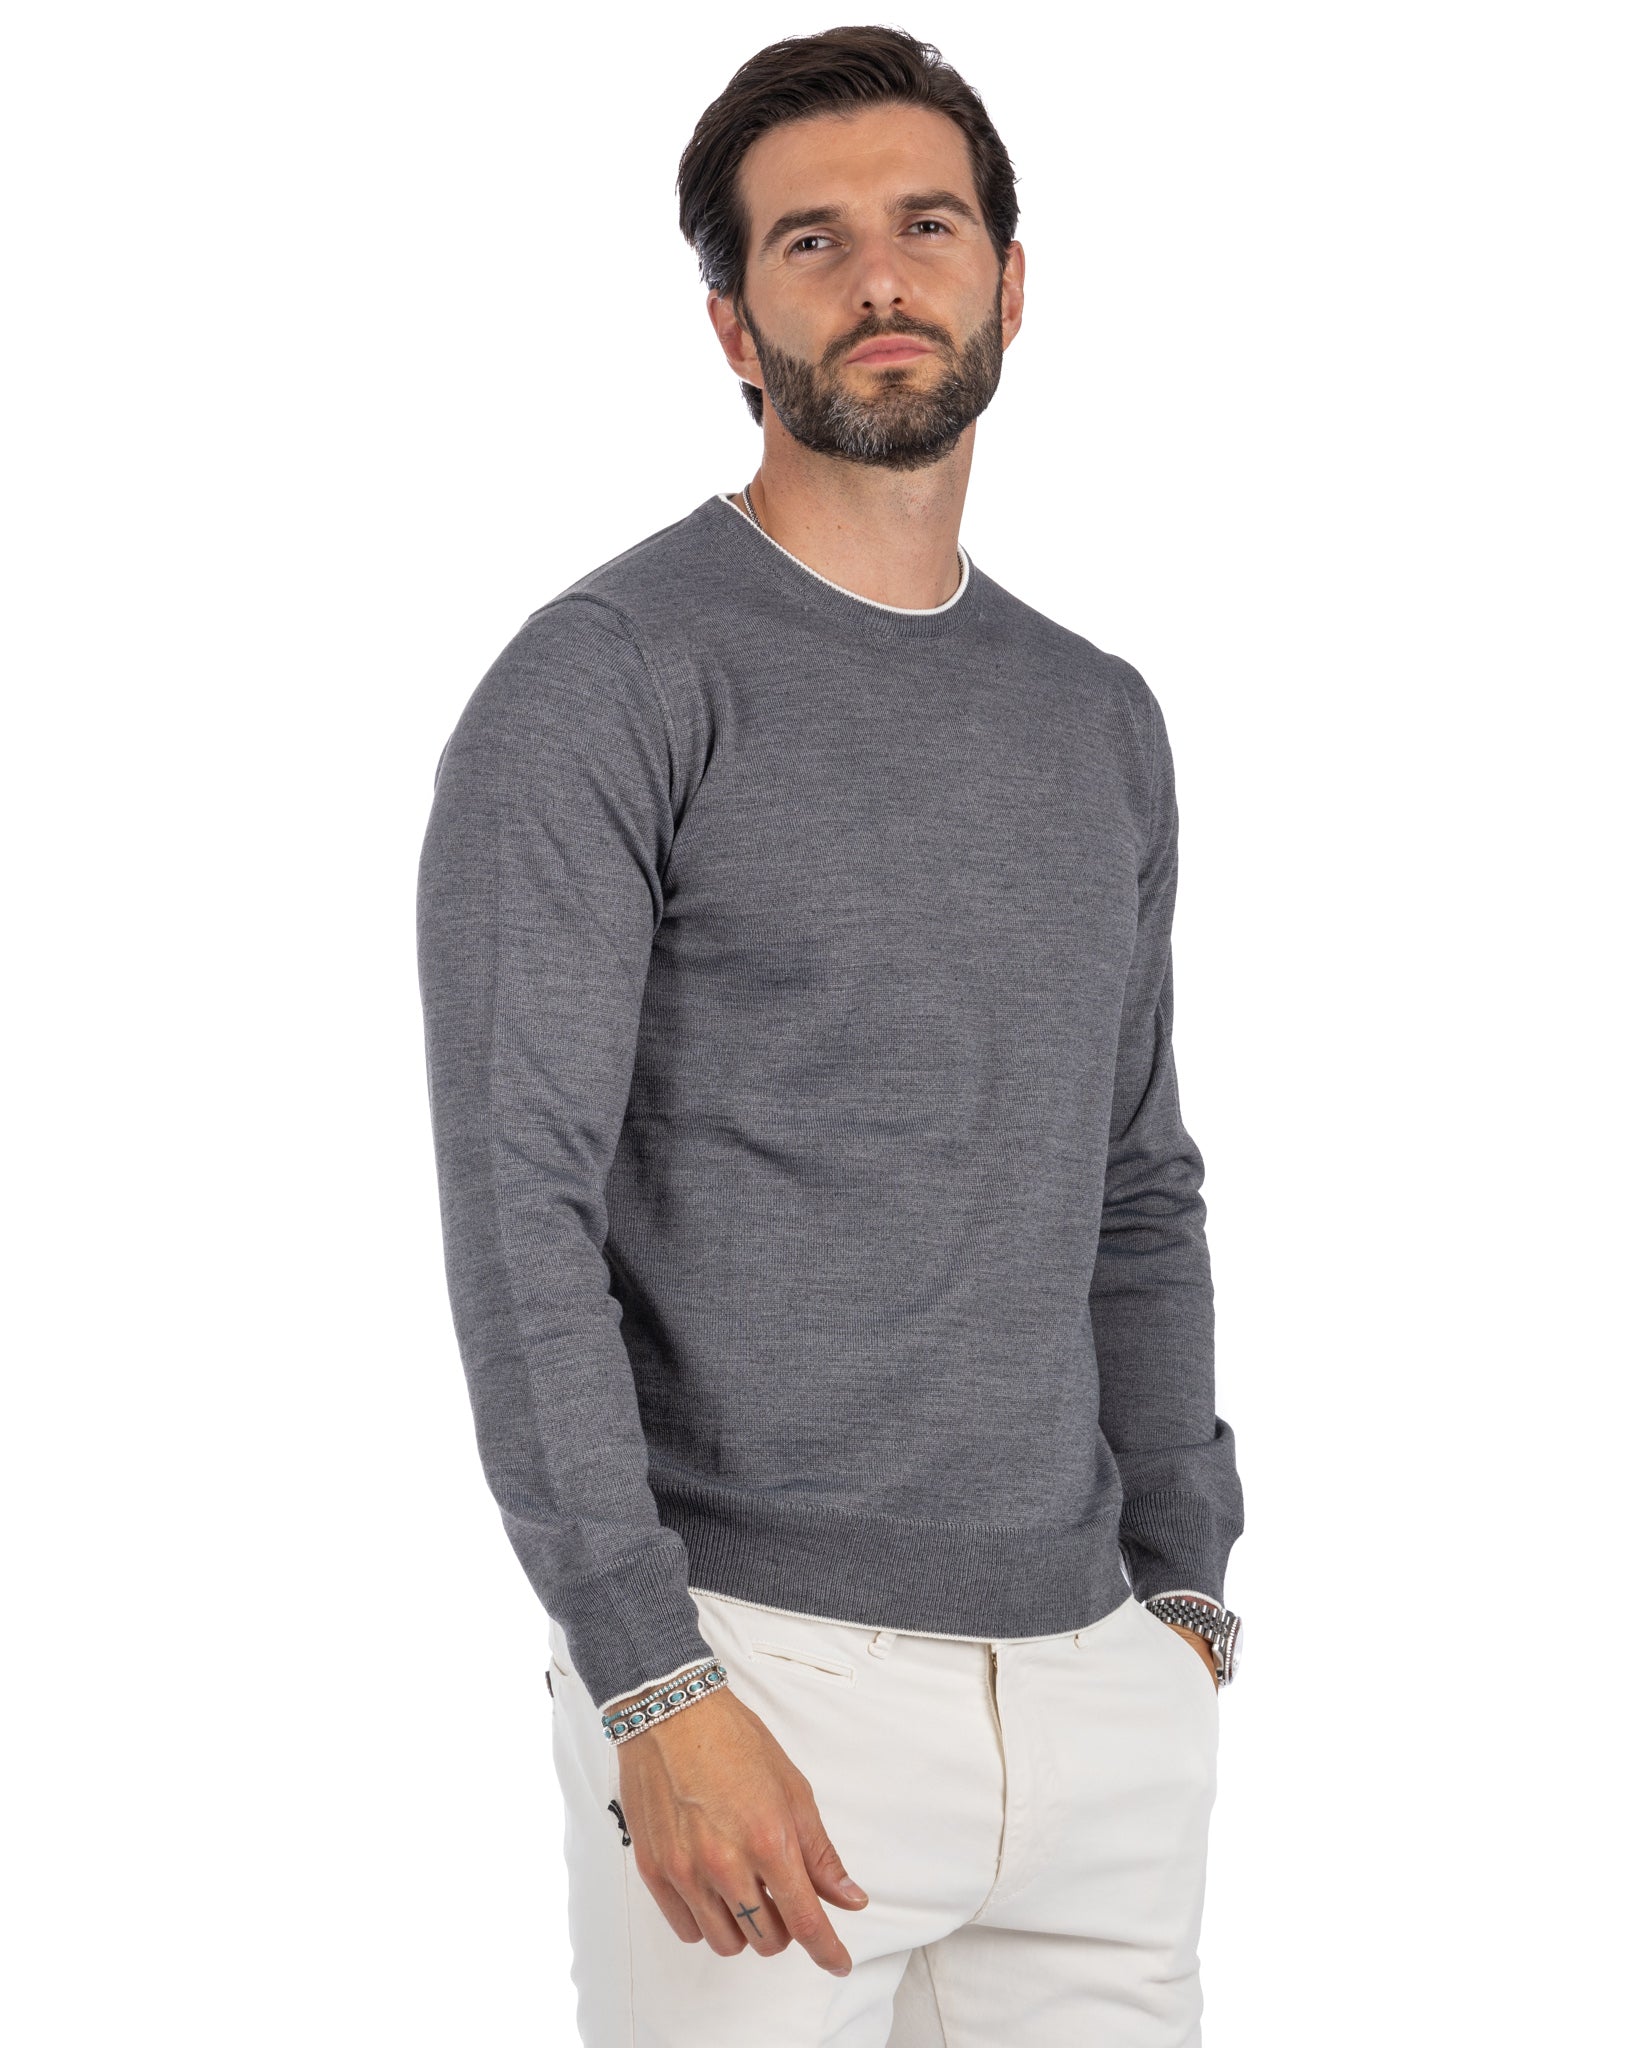 Seve - gray sweater with white border